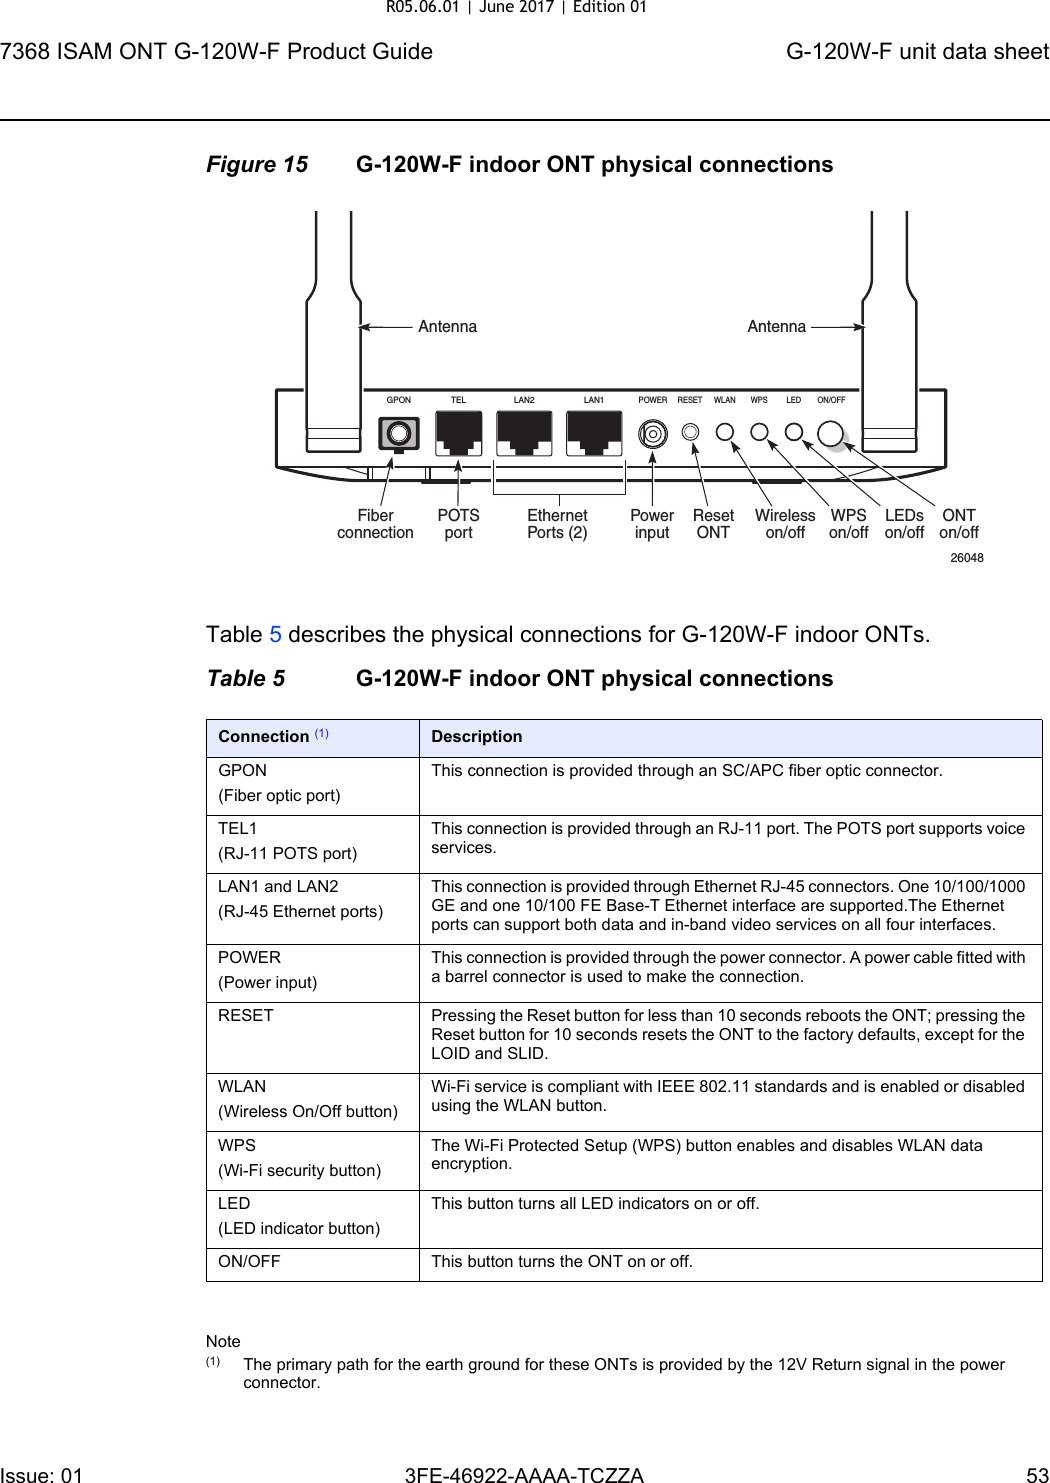 7368 ISAM ONT G-120W-F Product Guide G-120W-F unit data sheetIssue: 01 3FE-46922-AAAA-TCZZA 53 Figure 15 G-120W-F indoor ONT physical connectionsTable 5 describes the physical connections for G-120W-F indoor ONTs.Table 5 G-120W-F indoor ONT physical connectionsNote(1) The primary path for the earth ground for these ONTs is provided by the 12V Return signal in the power connector.Connection (1) DescriptionGPON (Fiber optic port)This connection is provided through an SC/APC fiber optic connector. TEL1(RJ-11 POTS port)This connection is provided through an RJ-11 port. The POTS port supports voice services. LAN1 and LAN2(RJ-45 Ethernet ports)This connection is provided through Ethernet RJ-45 connectors. One 10/100/1000 GE and one 10/100 FE Base-T Ethernet interface are supported.The Ethernet ports can support both data and in-band video services on all four interfaces.POWER(Power input)This connection is provided through the power connector. A power cable fitted with a barrel connector is used to make the connection. RESET Pressing the Reset button for less than 10 seconds reboots the ONT; pressing the Reset button for 10 seconds resets the ONT to the factory defaults, except for the LOID and SLID.WLAN (Wireless On/Off button)Wi-Fi service is compliant with IEEE 802.11 standards and is enabled or disabled using the WLAN button. WPS (Wi-Fi security button)The Wi-Fi Protected Setup (WPS) button enables and disables WLAN data encryption.LED (LED indicator button)This button turns all LED indicators on or off.ON/OFF This button turns the ONT on or off. TELGPON LAN2 LAN1POWERRESET WLAN WPSLED ON/OFFFiberconnectionPOTSportEthernetPorts (2)PowerinputResetONTAntennaAntennaWirelesson/offWPSon/offLEDson/offONTon/off26048R05.06.01 | June 2017 | Edition 01 